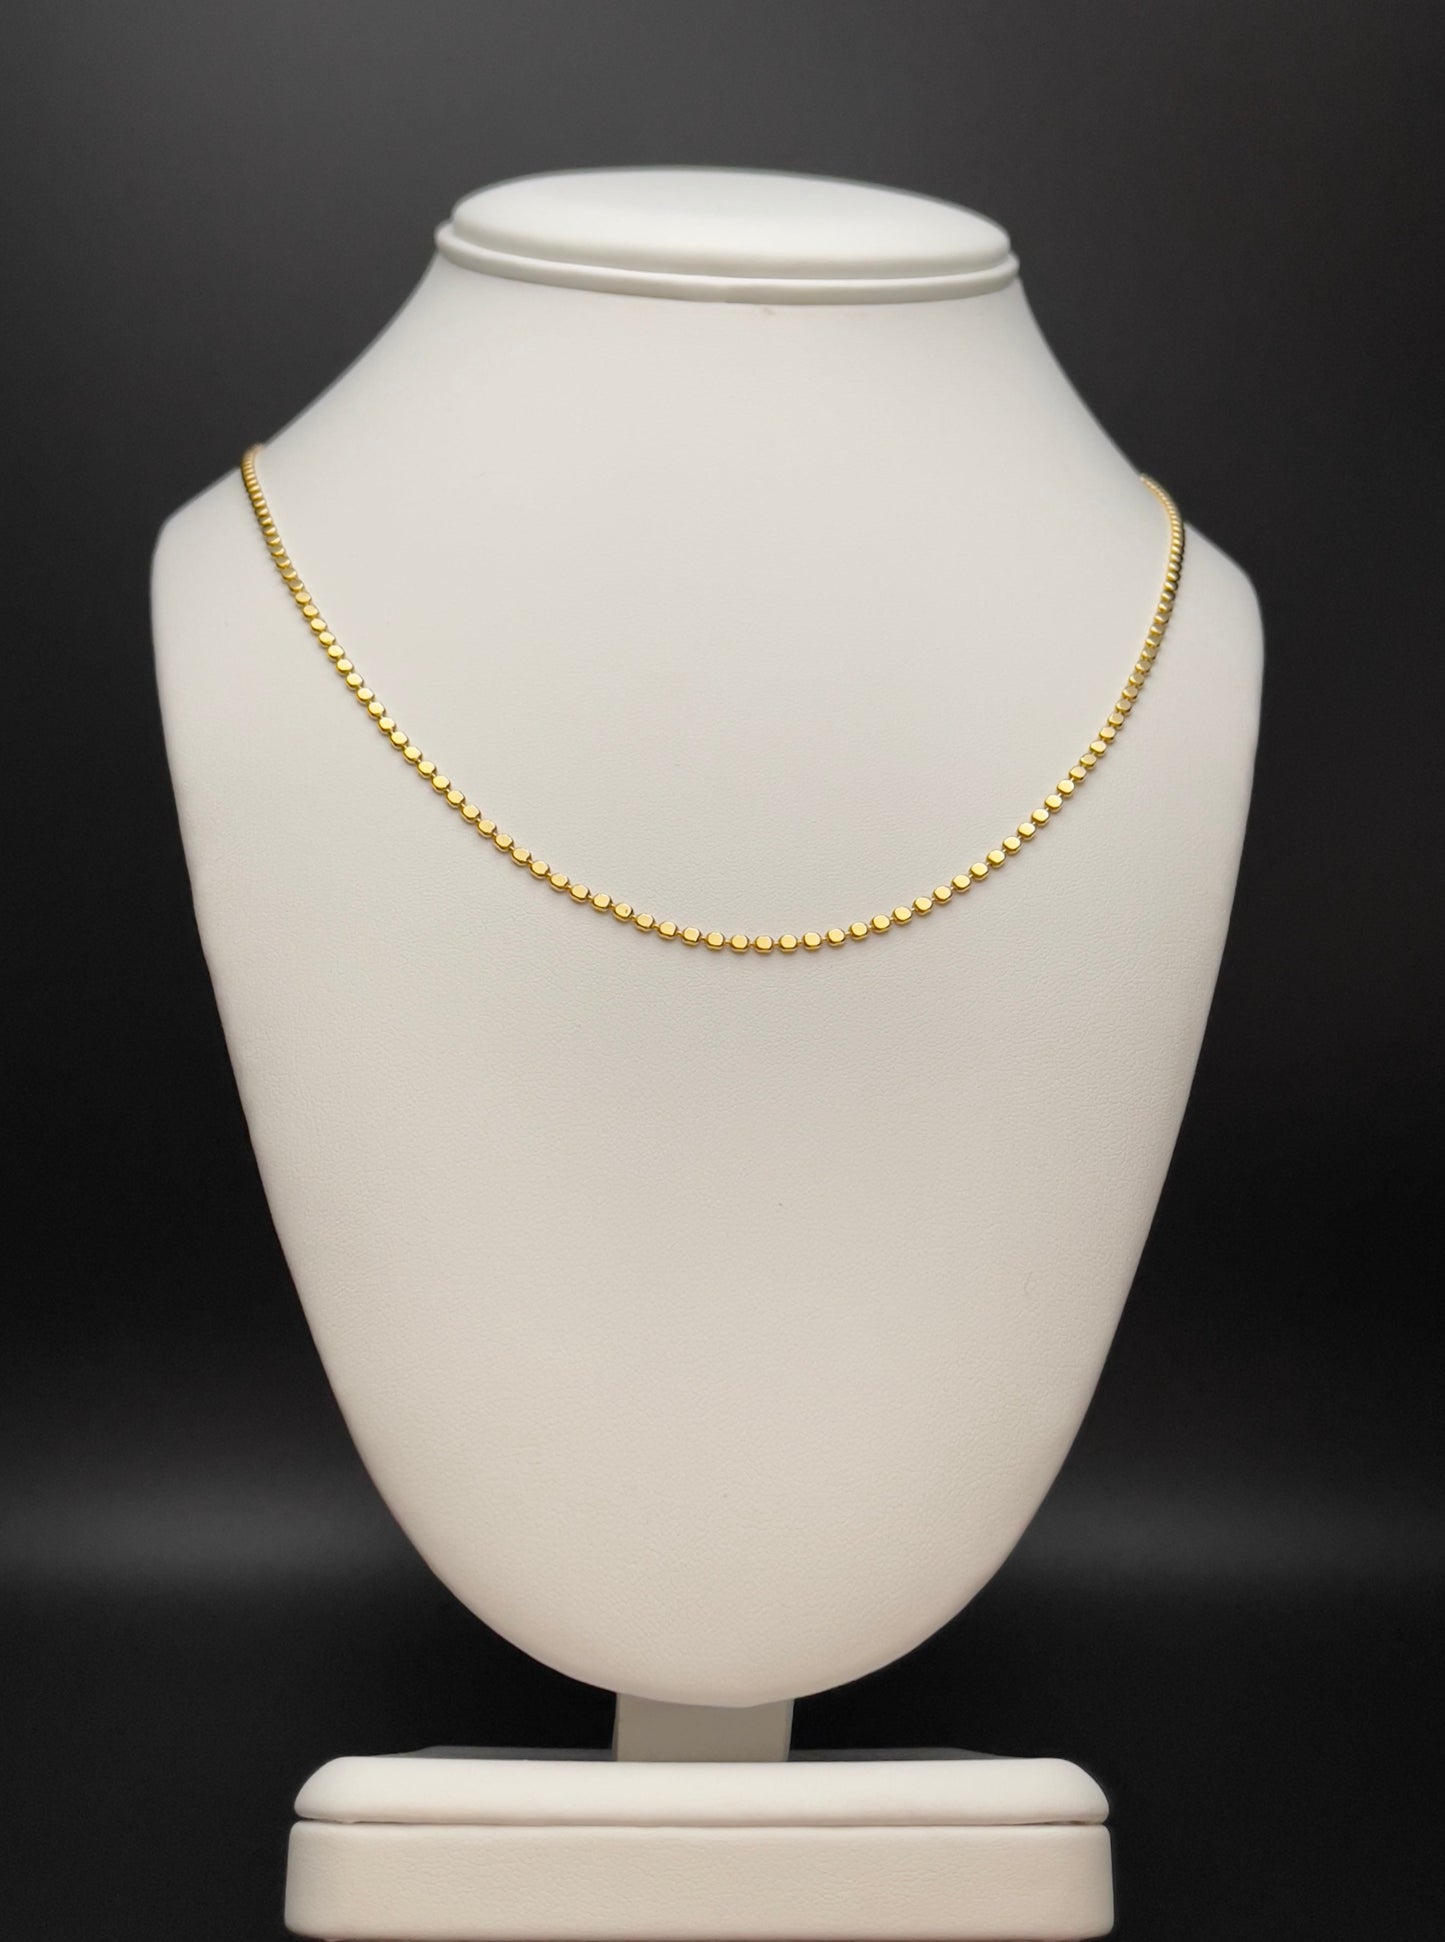 Image of necklace. Chain Length: 18 inches Chain Type: flat bead Chain Thickness: 2 mm Clasp: Lobster Chain: 18k Gold-filled 